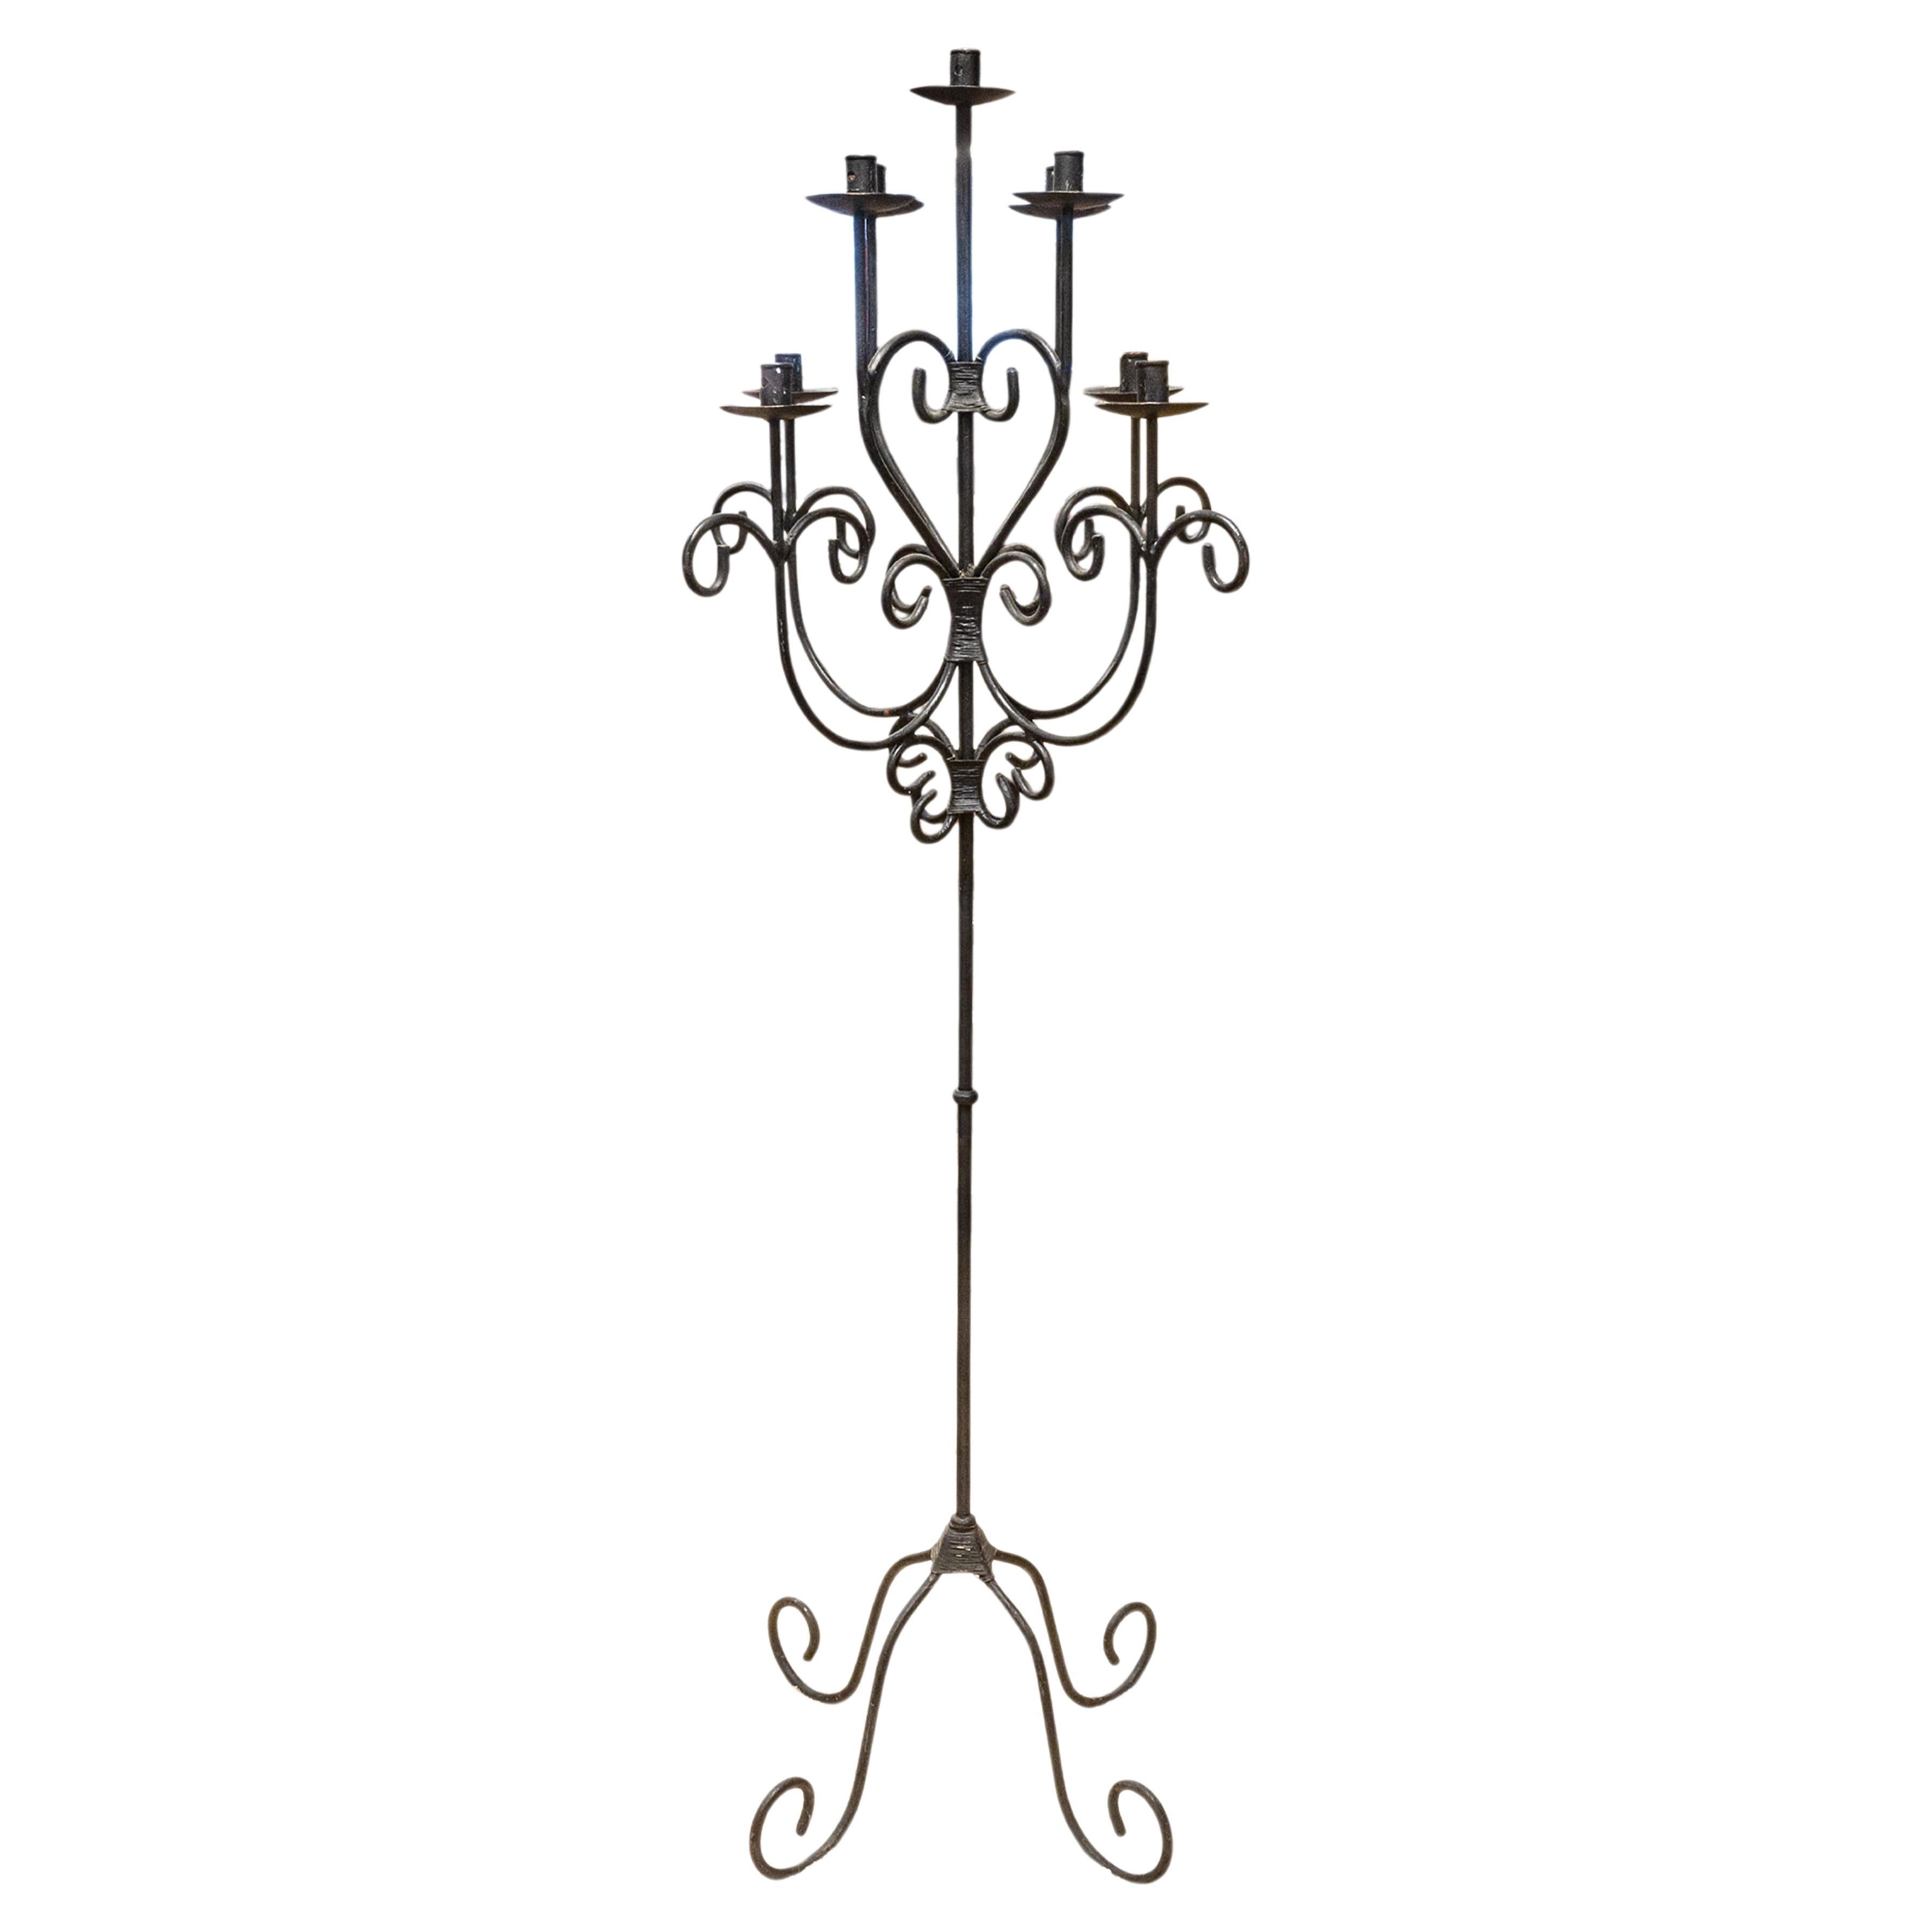 Black Wrought Iron Gothic Free Standing Candelabra For Sale